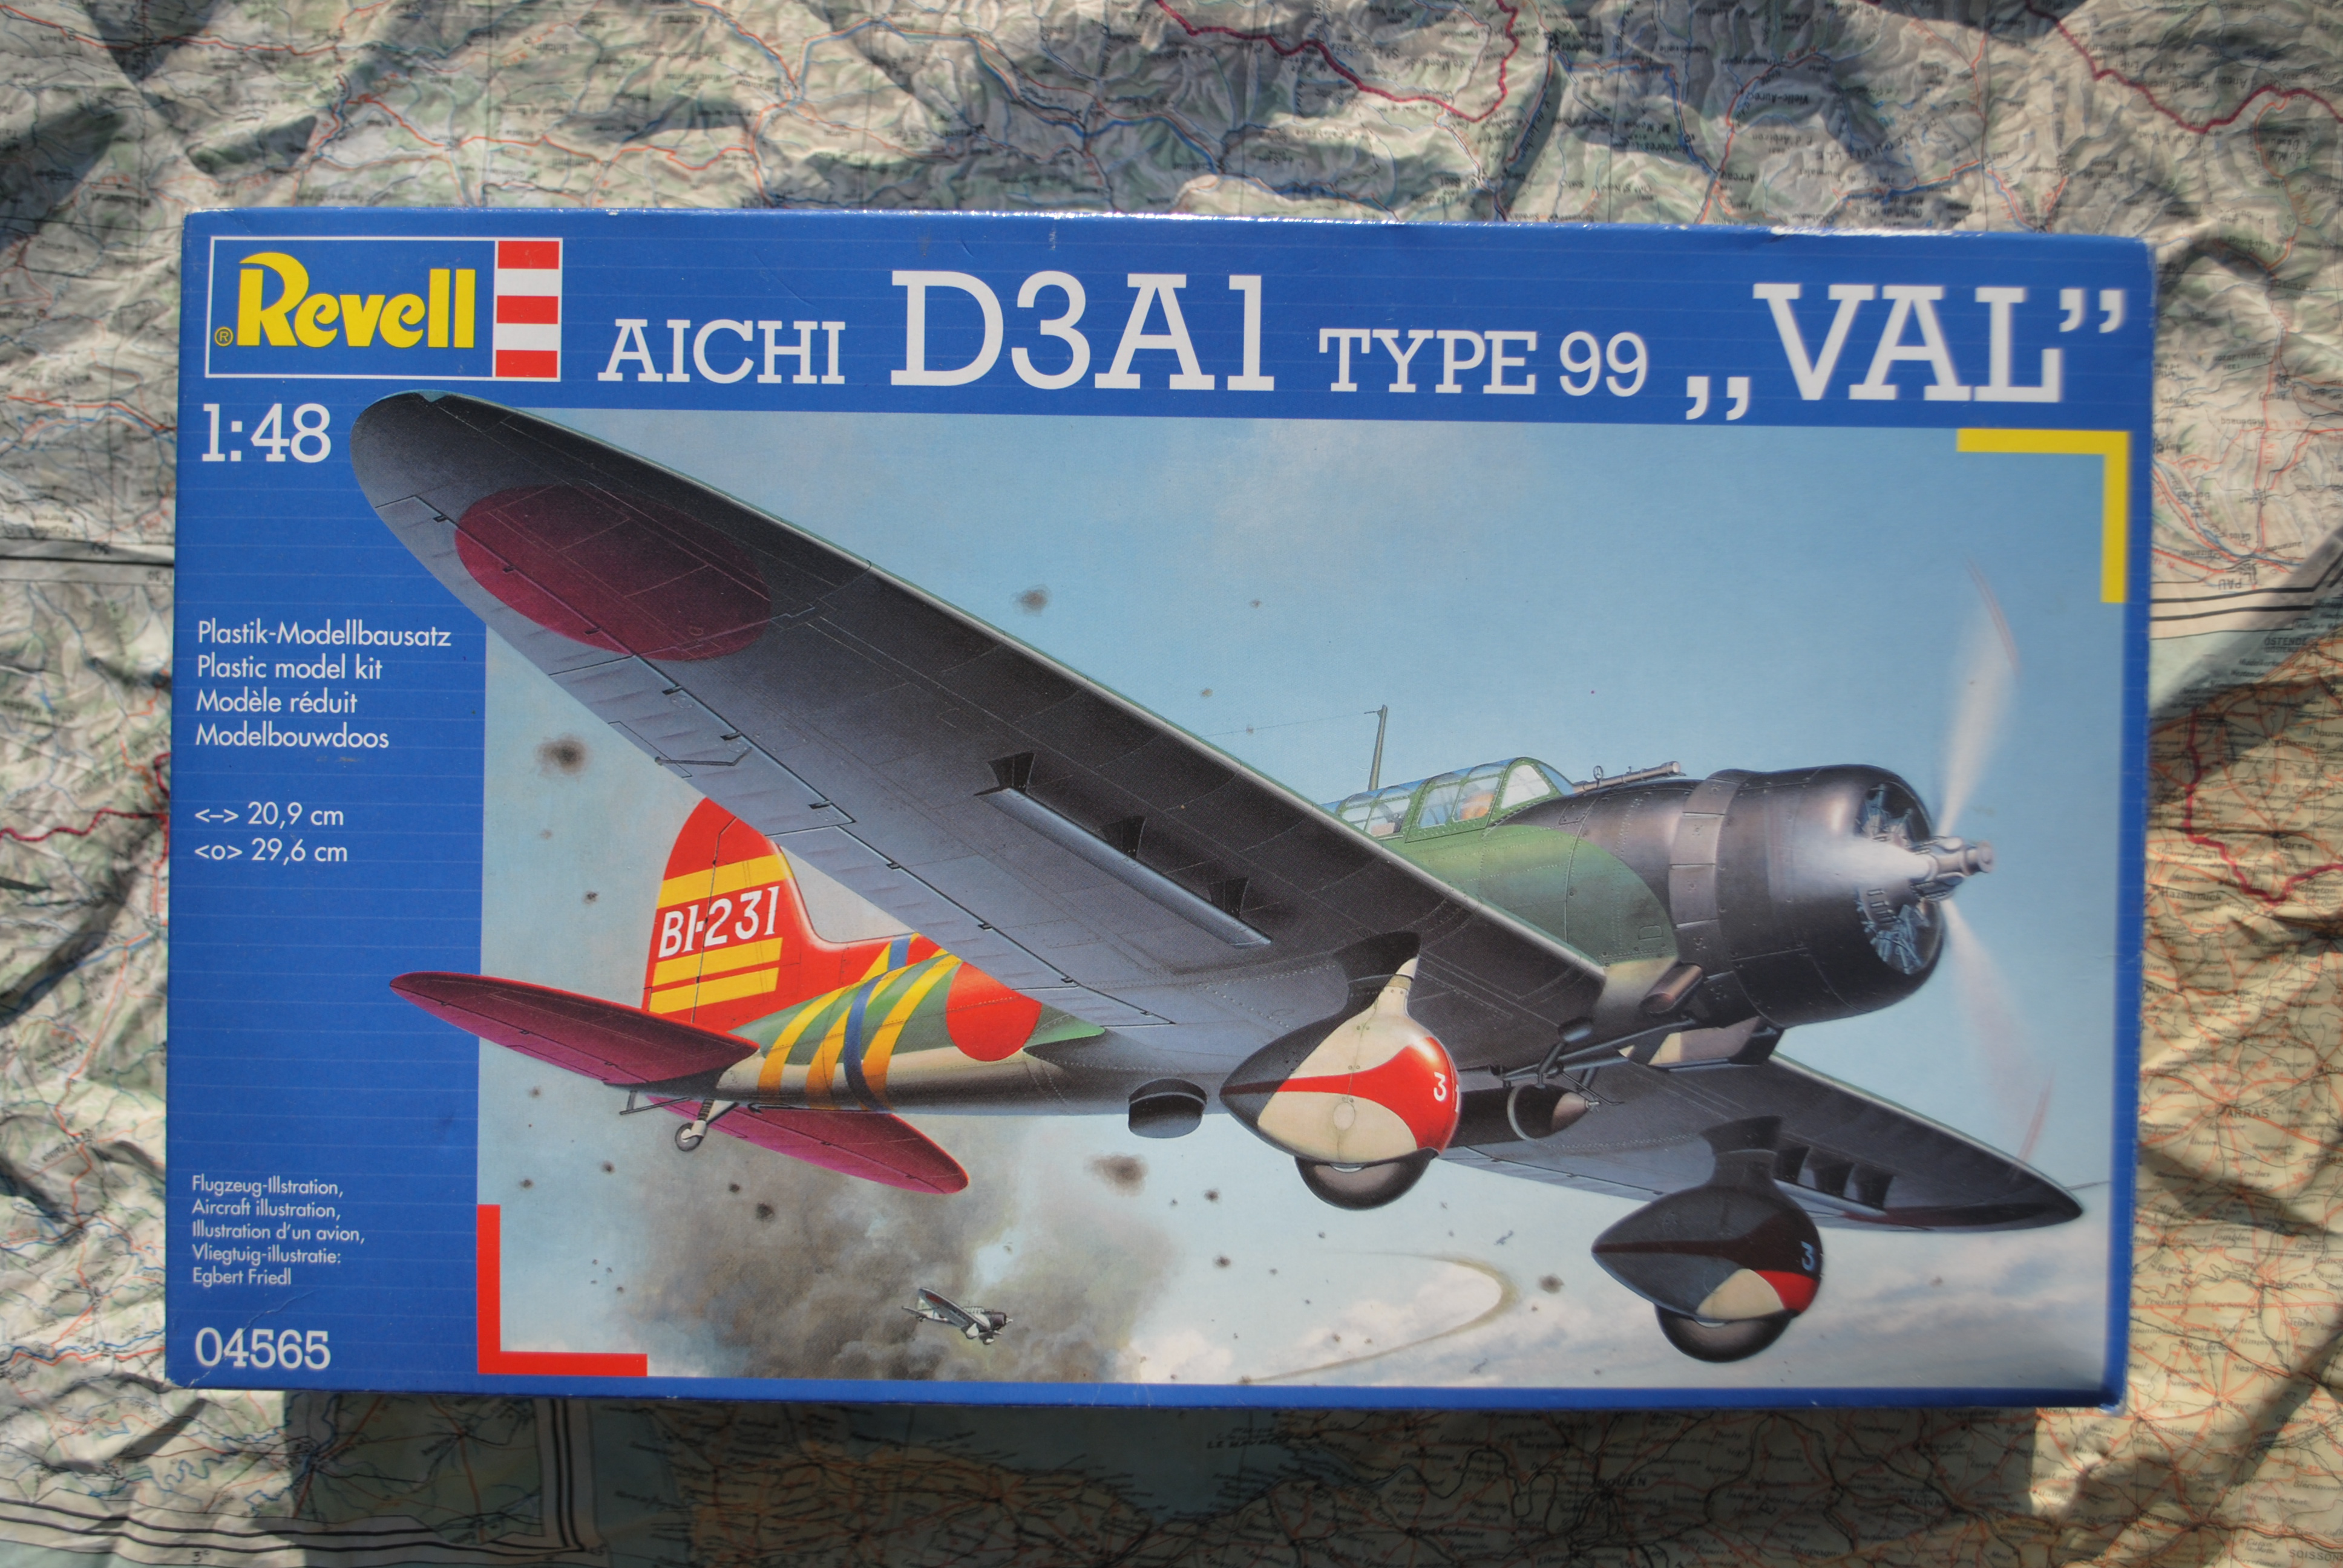 Revell 04565 Aichi D3A1 Type 99 